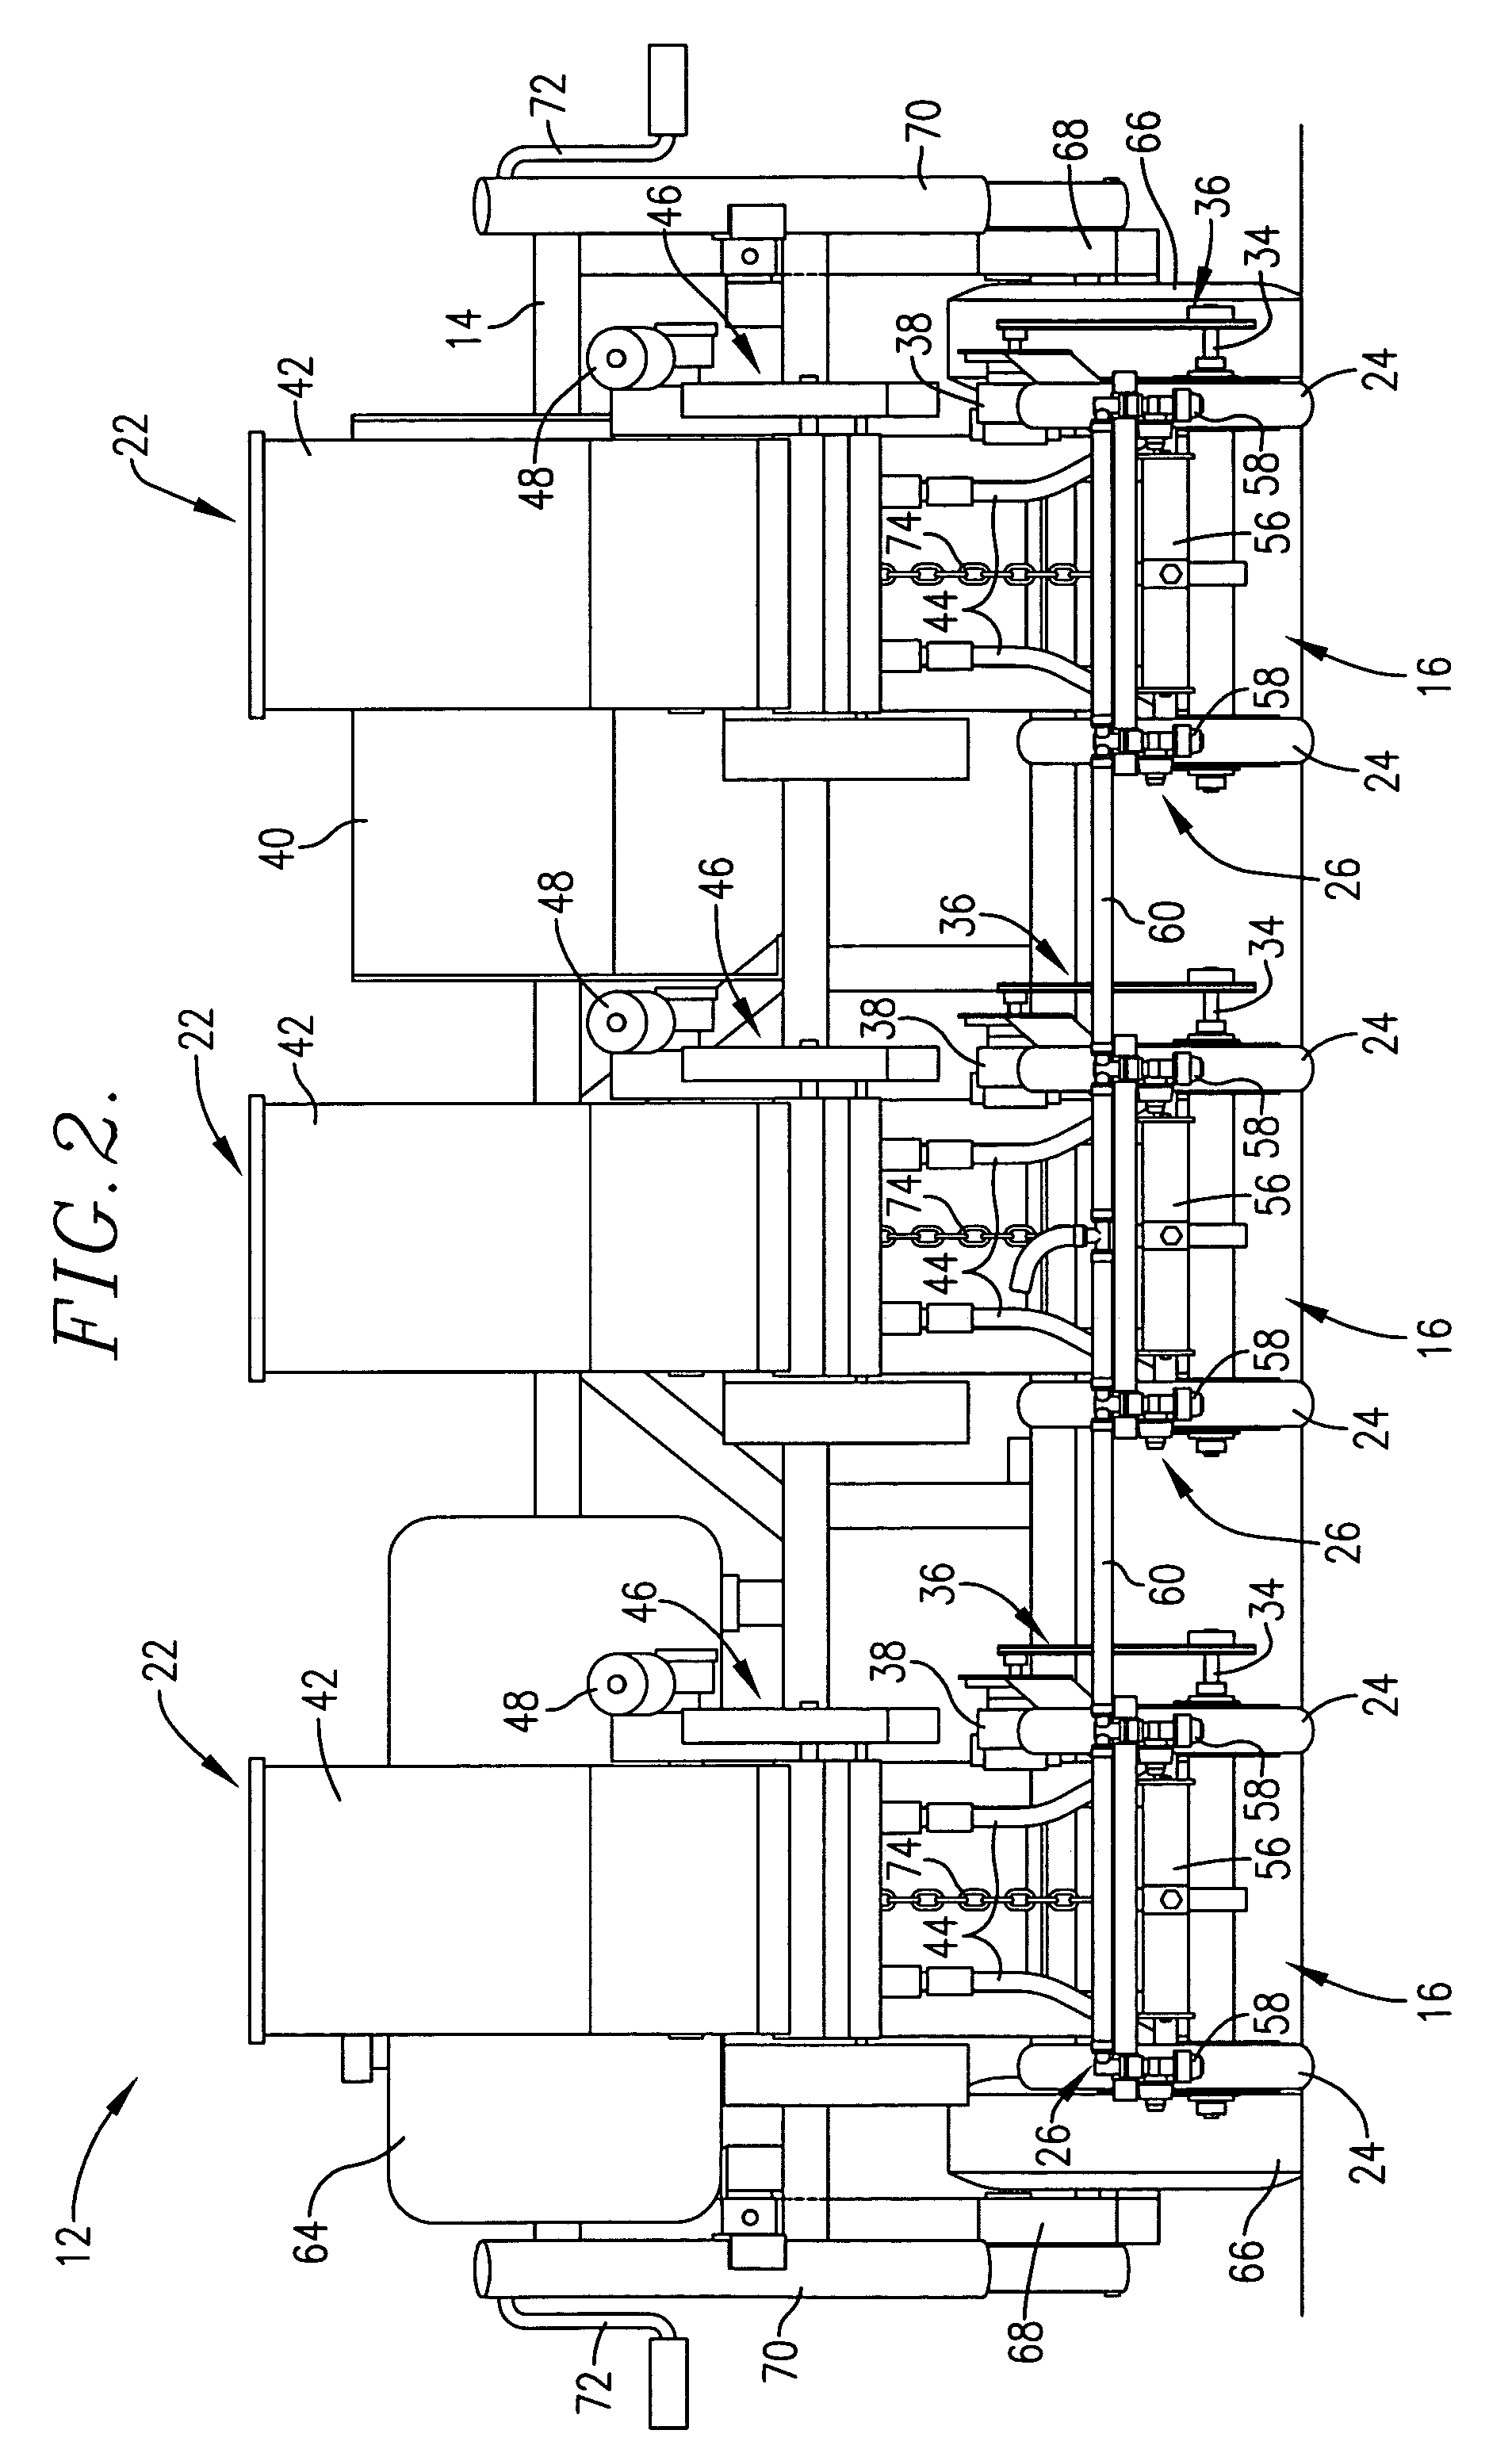 Method and equipment for interseeding an area of ground to convert the existing vegetation or to improve the quality of the existing vegetation